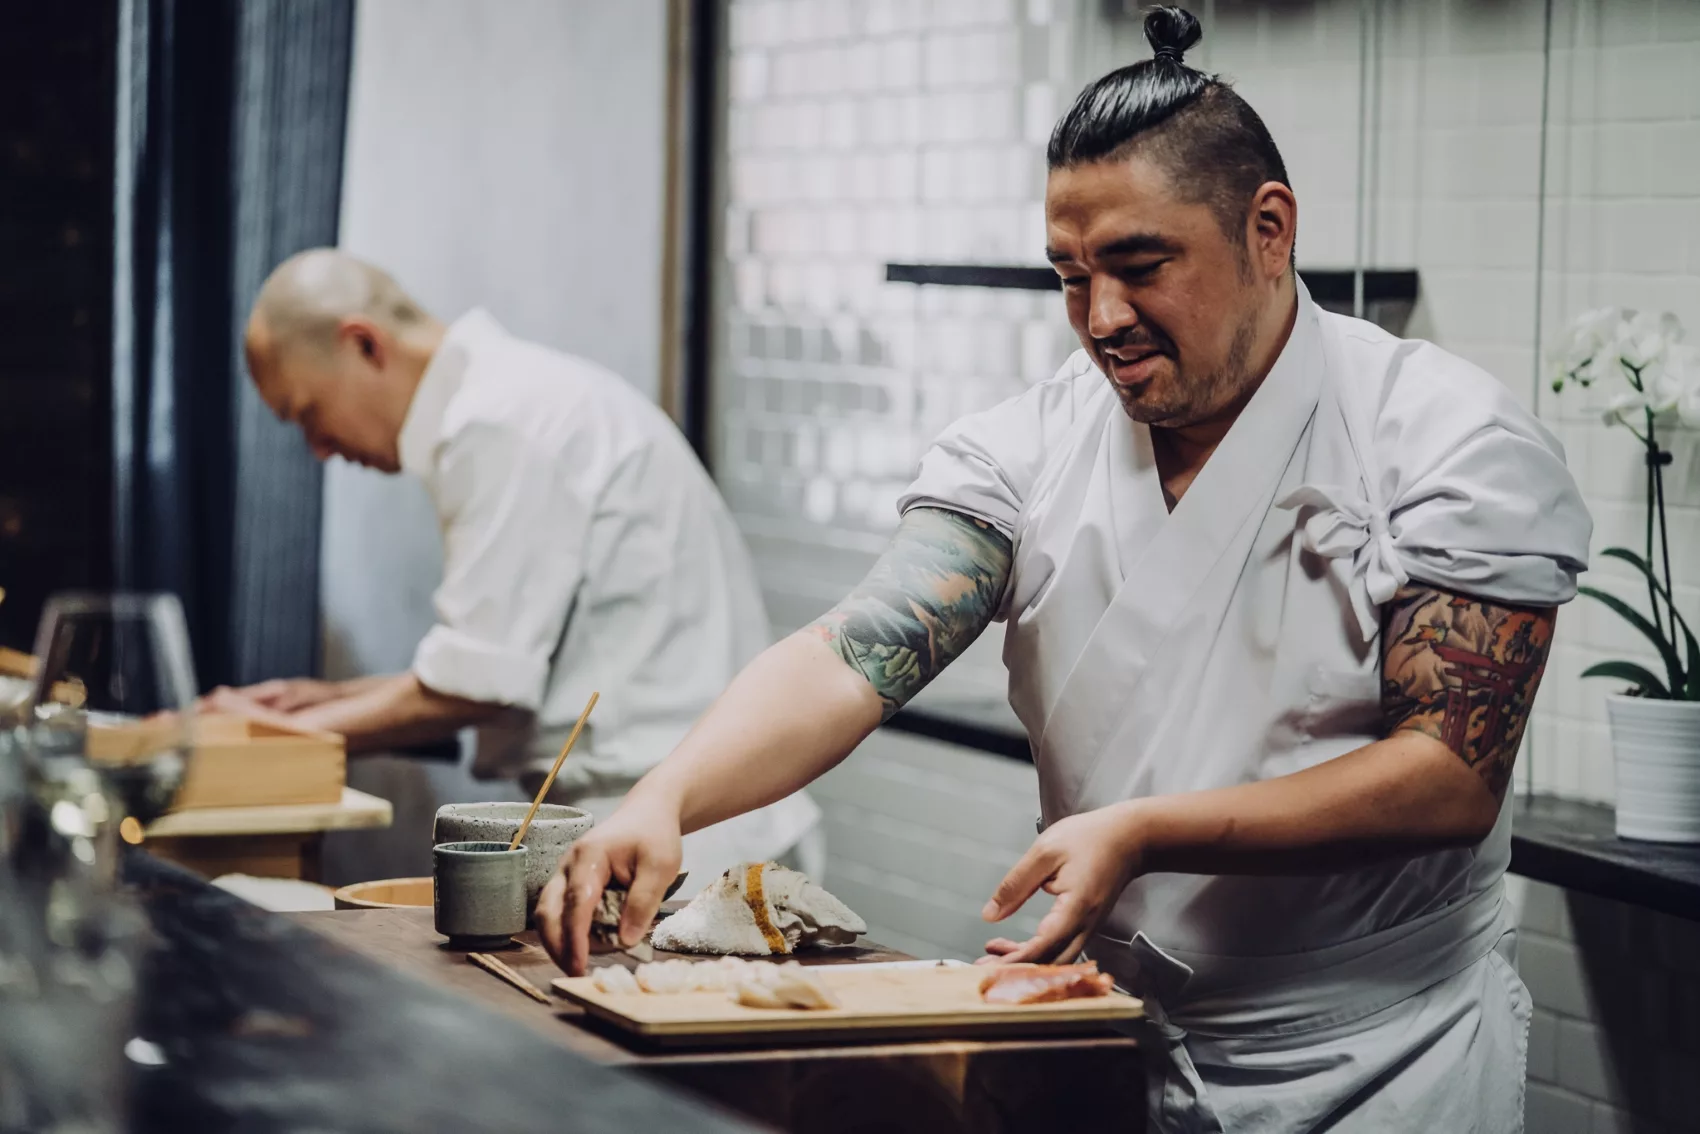 This Meaty Pop-Up Restaurant in Tokyo Wants to Get You Mad Swole